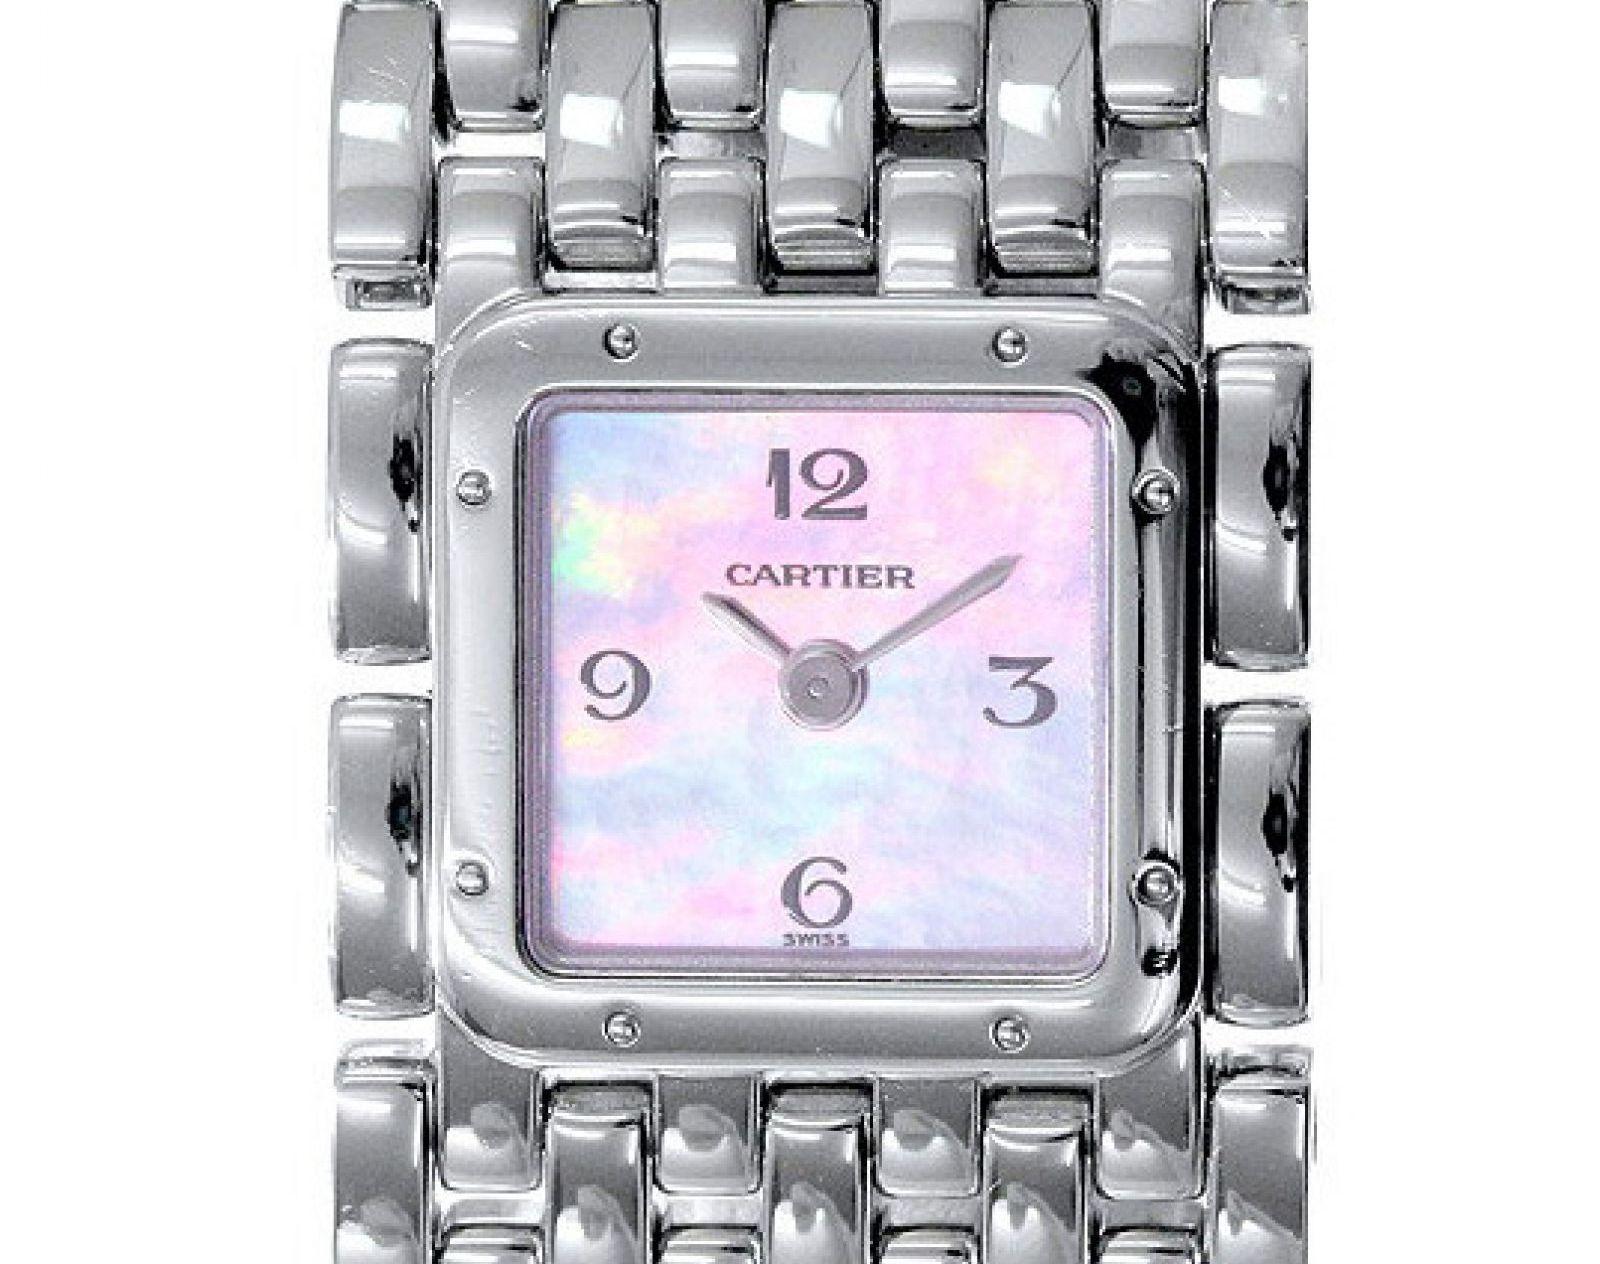 Beautiful Cartier Panthère Ruban Stainless Steel & Mother of Pearl Wristwatch
Steel Case with pink mother of pearl dial
22 mm case size
Quartz movement
Original Cartier deployment clasp
Complete with box and papers
Comes with fresh battery
Located